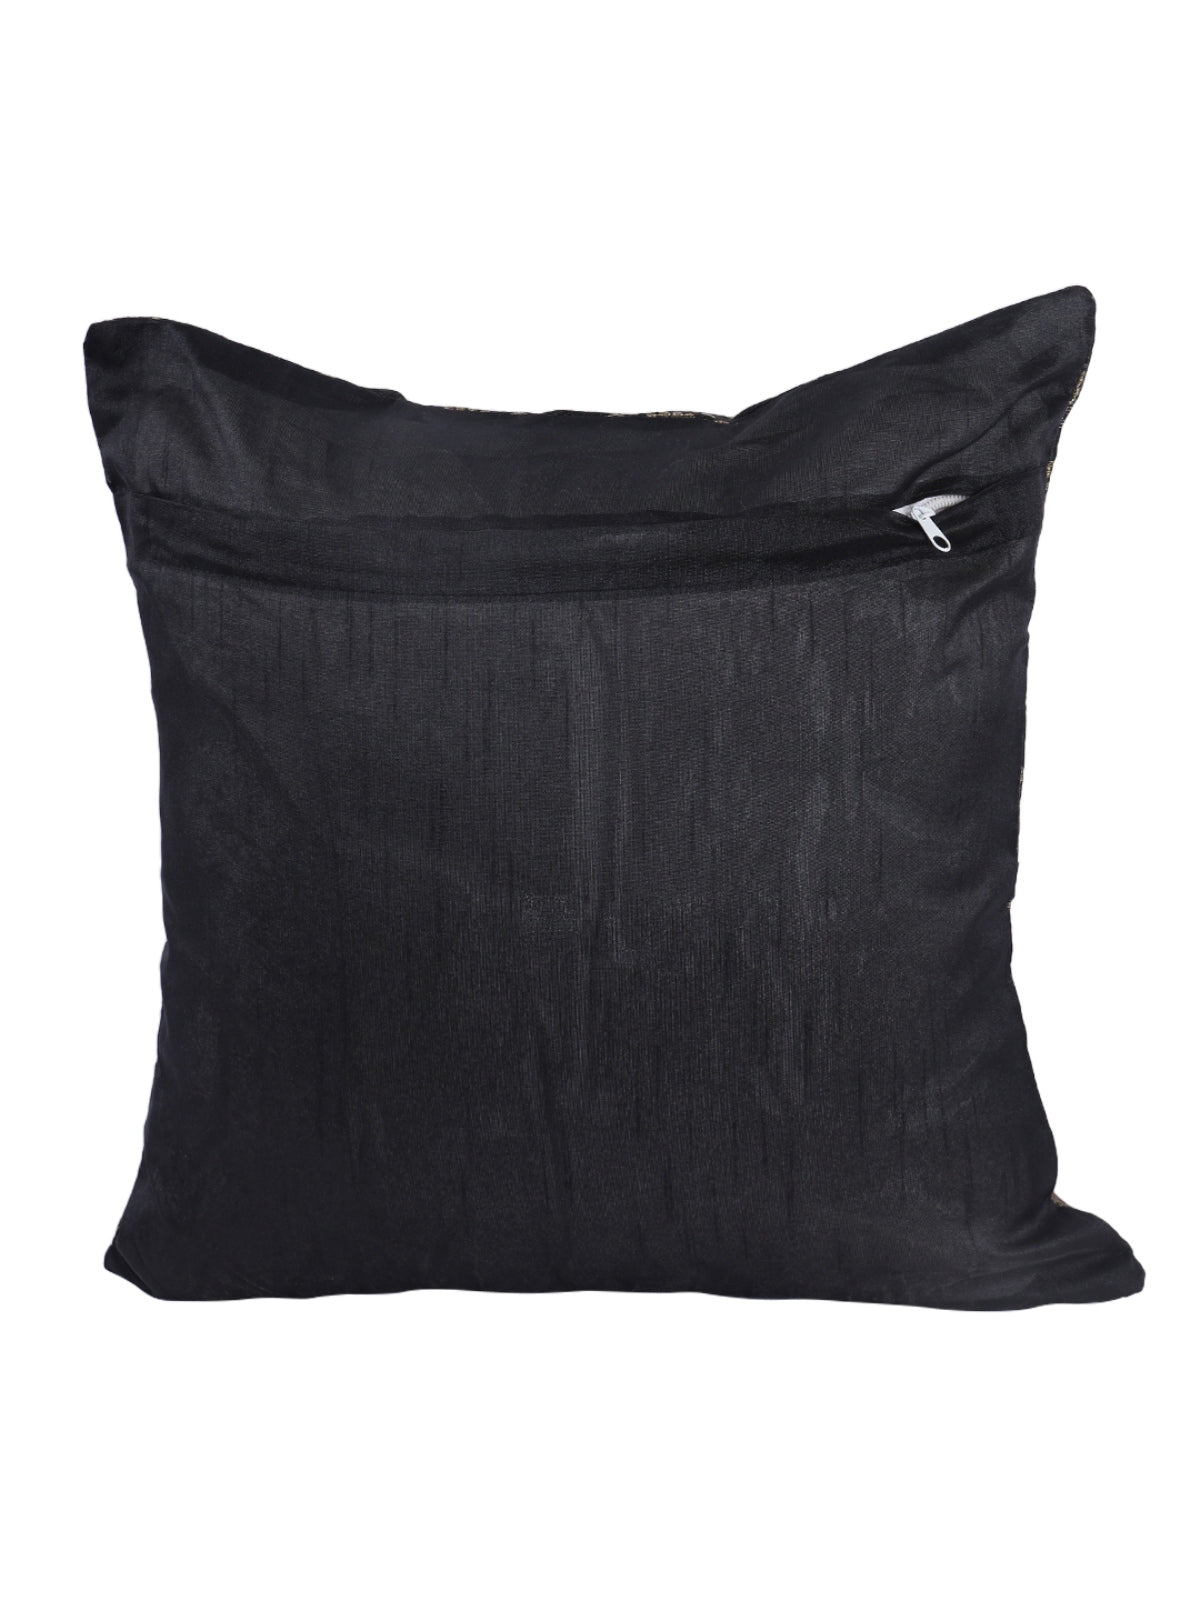 Black & Gold Set of 5 Polyester 16 Inch x 16 Inch Cushion Covers